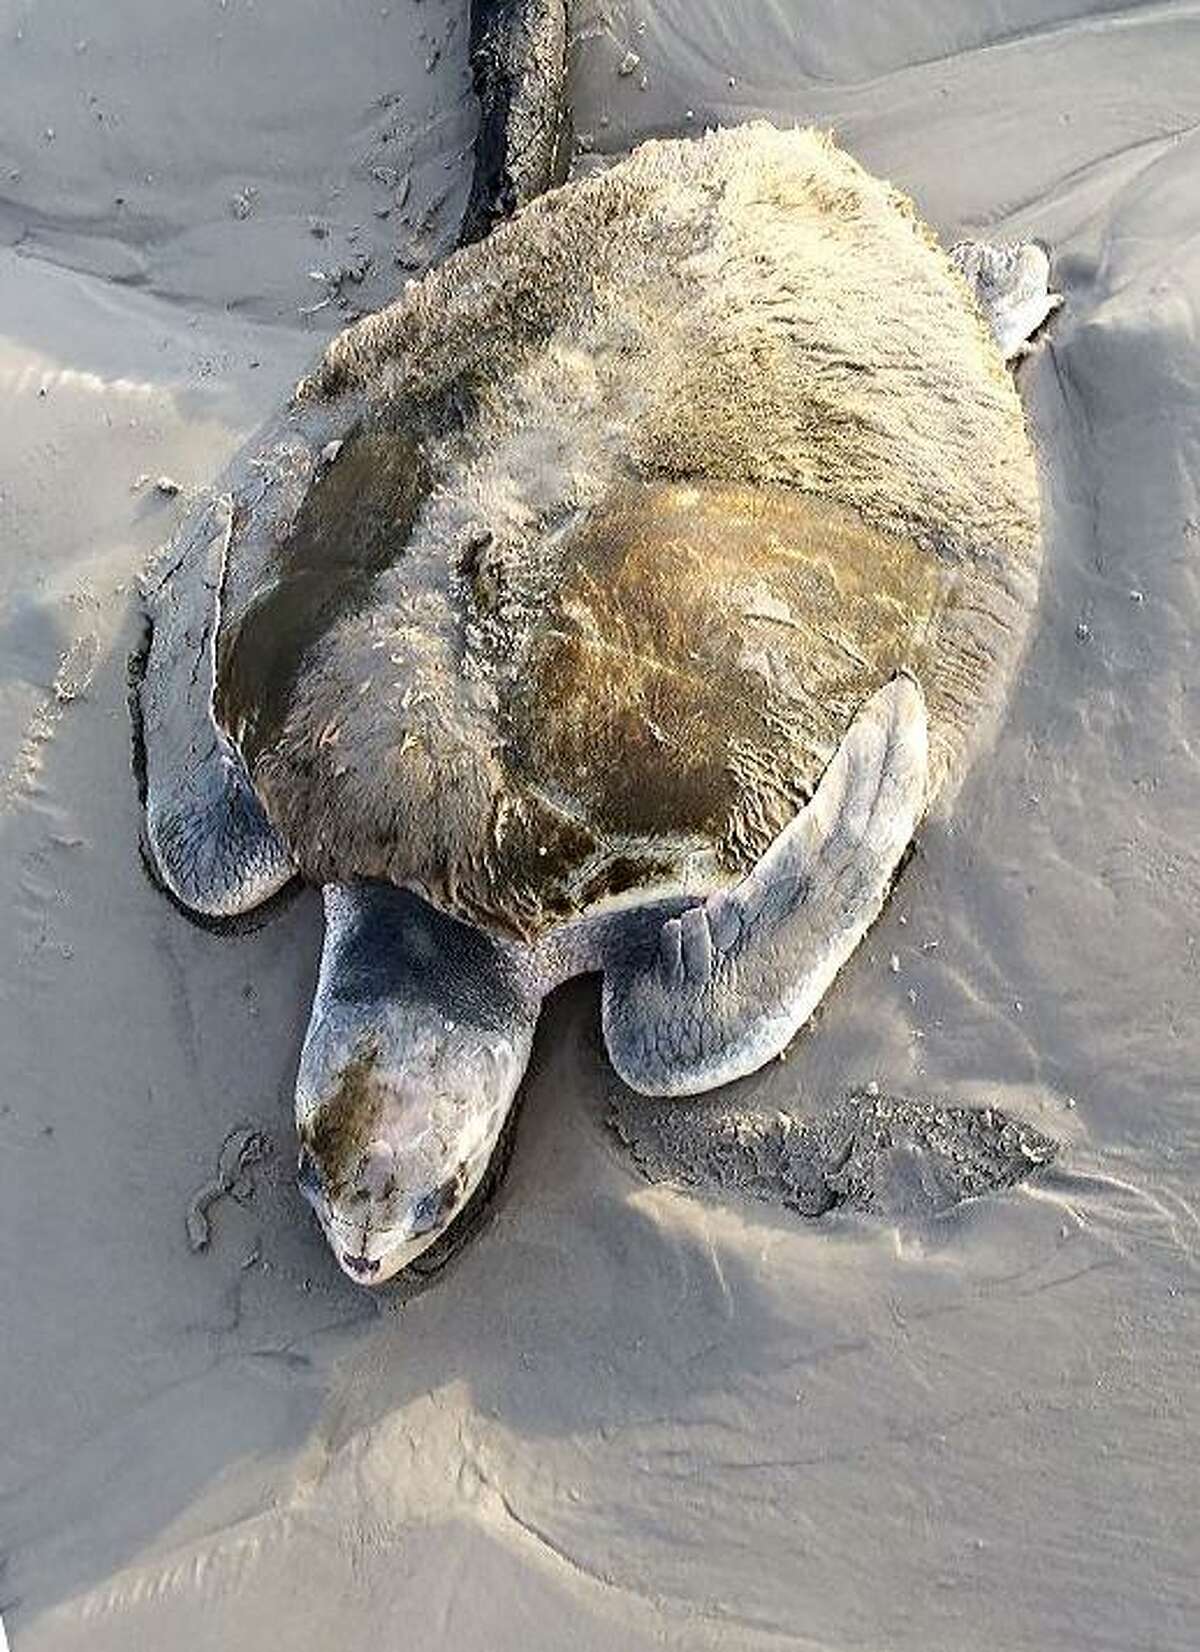 A sick sea turtle was stranded on the west side of Galveston’s beach Oct. 9, 2018, covered in algae and barely conscious. After a NOAA Fisheries employee picked it up from the beach, the turtle was taken to the Houston Zoo for an exam and medical treatment. The turtle is now recovering at the National Oceanic and Atmospheric Administration’s Galveston facility.